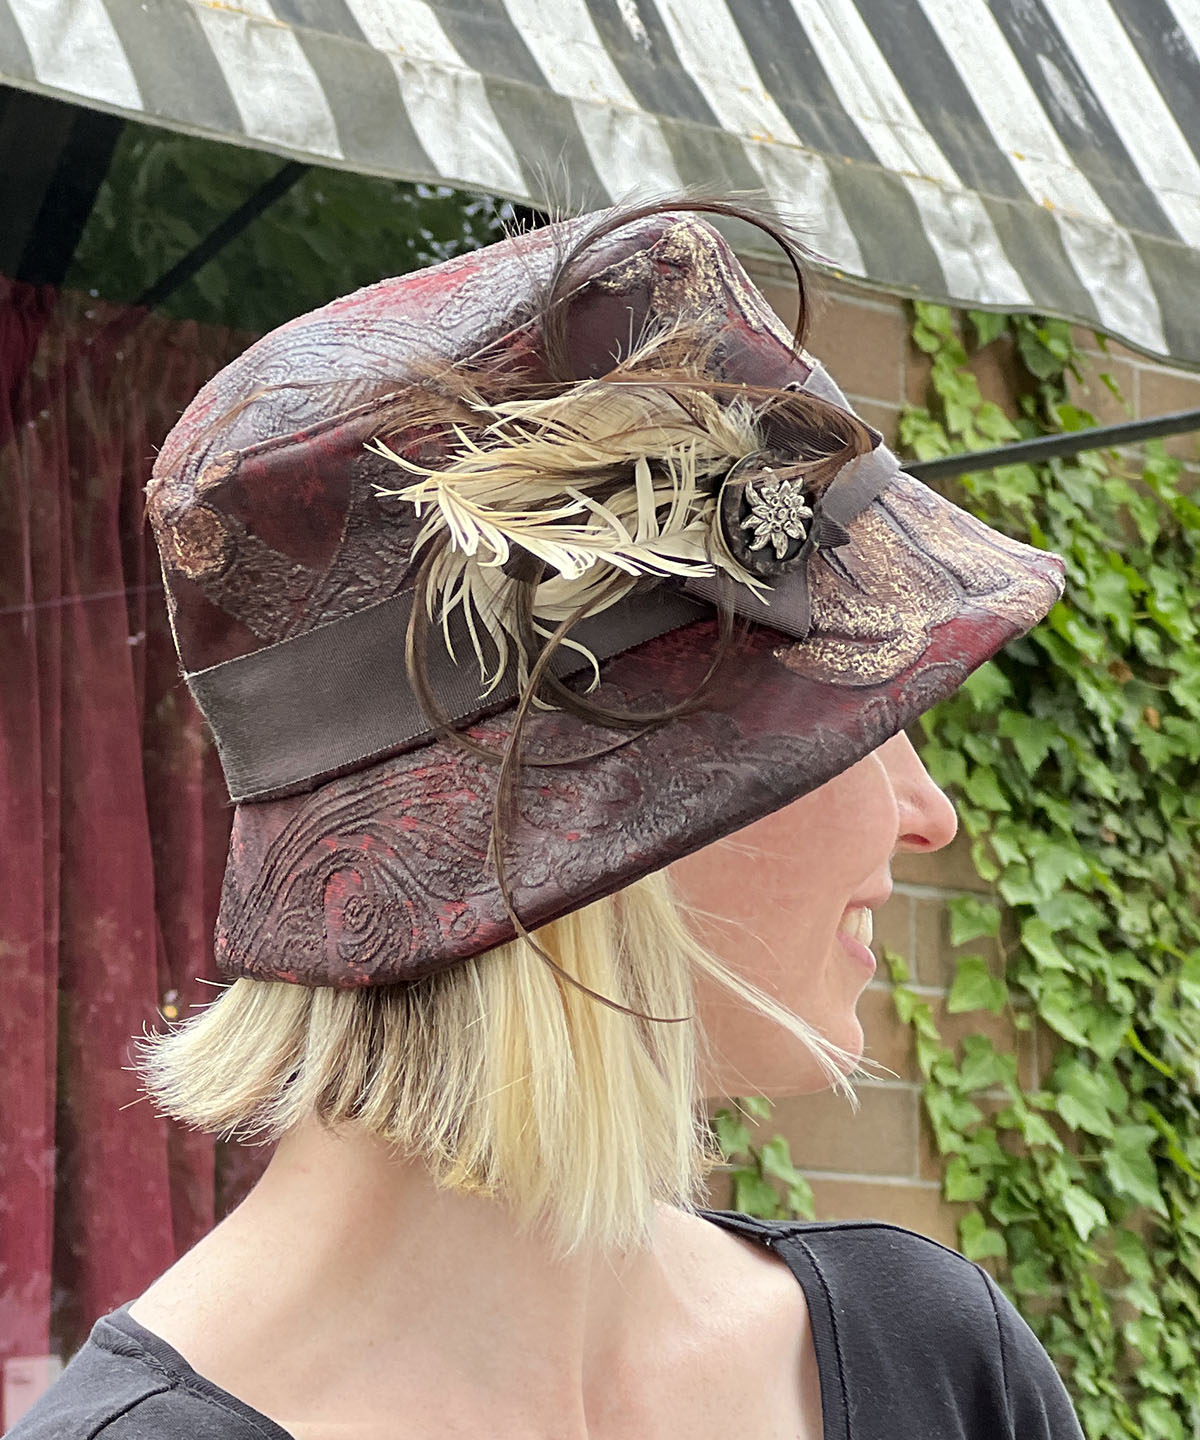 Back View of Samantha Bucket Hat | Renaissance In Ox Blood Upholstery | Feather and Button Brooch | Handmade in Seattle, WA USA by Pandemonium Millinery